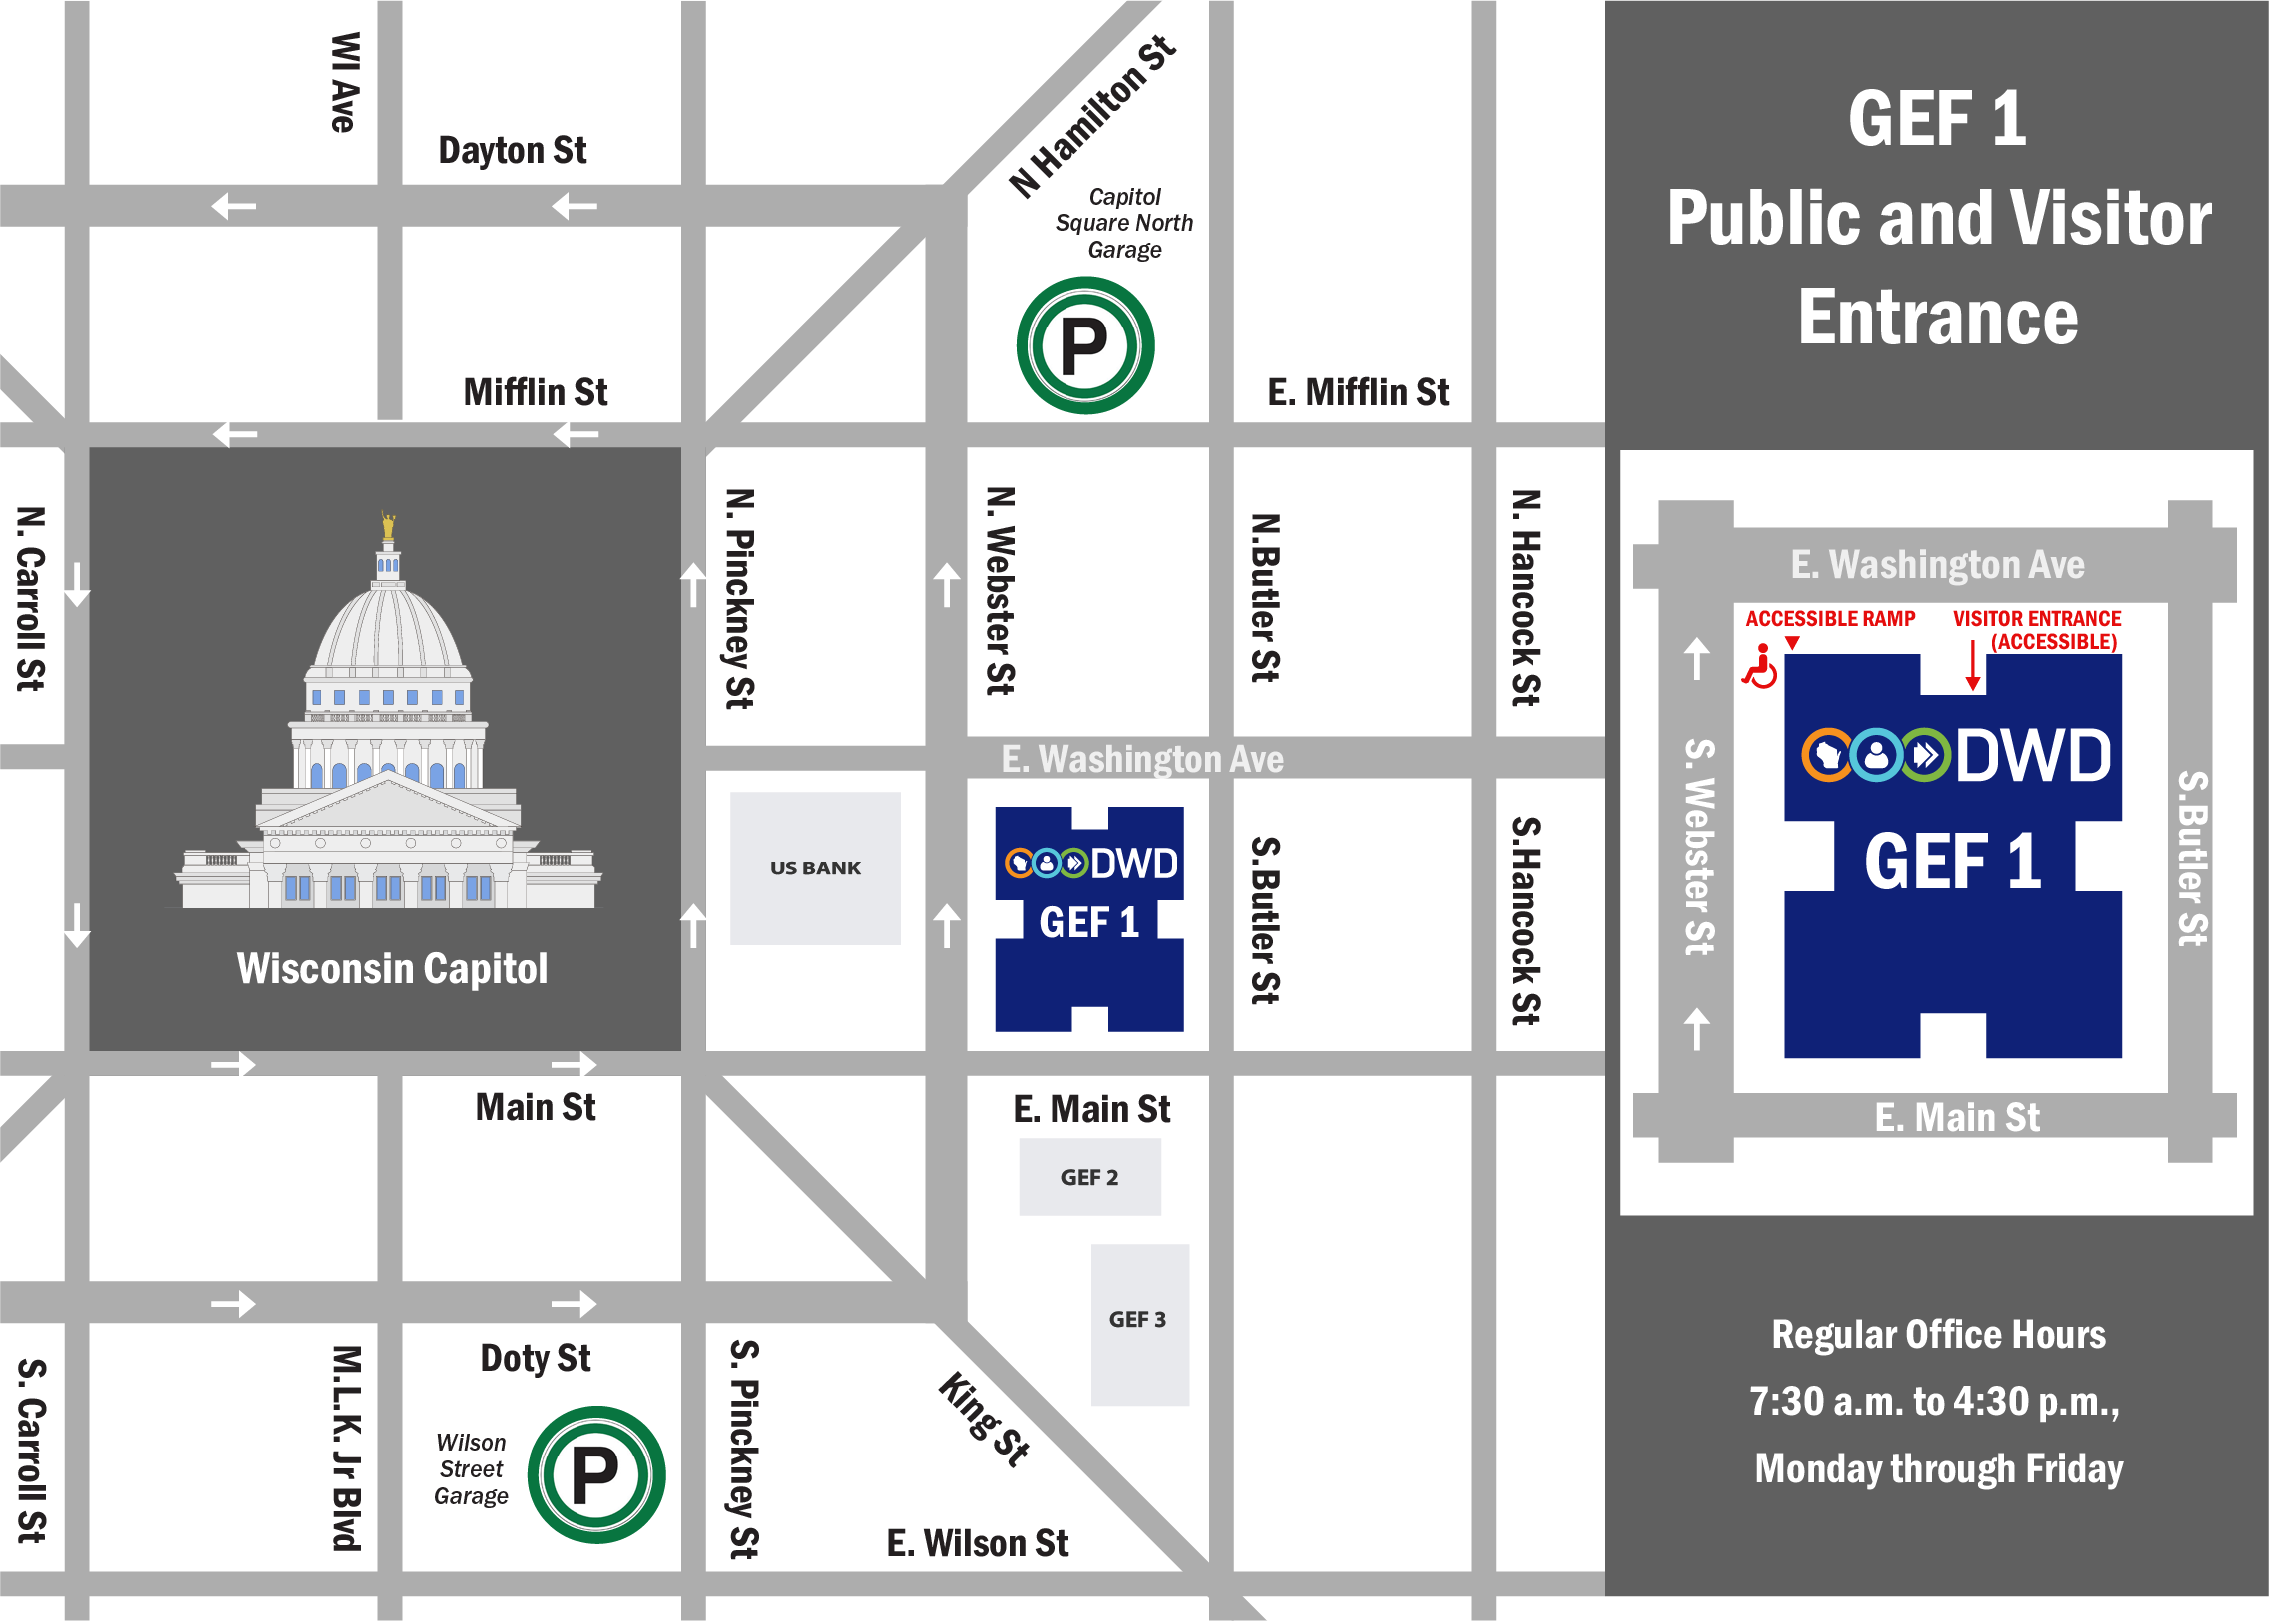 DWD GEF 1 Entry Map and Electronic Access Locations